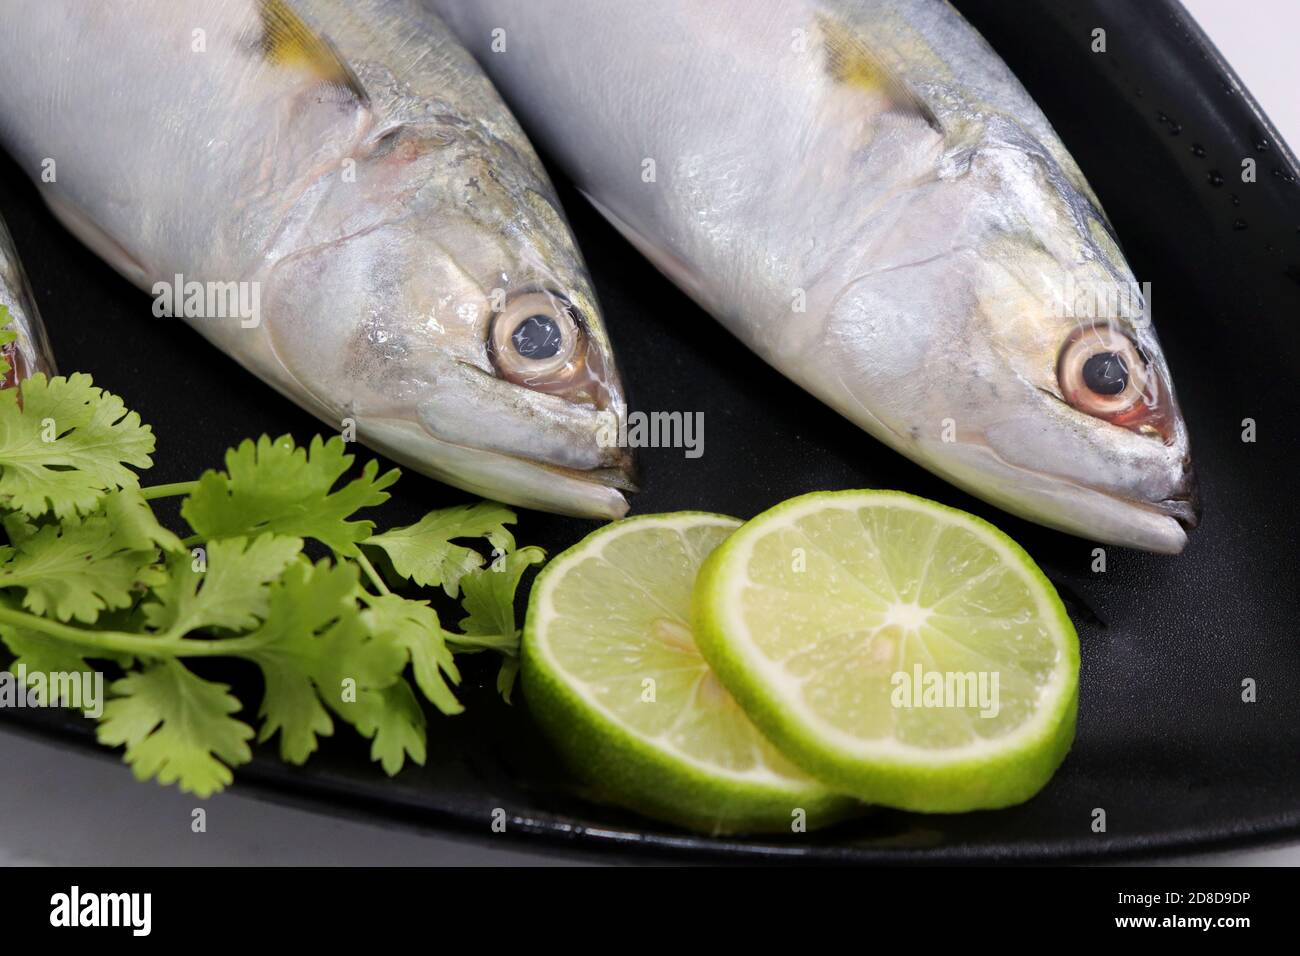 Uncooked Indian mackerel fish Rastrelliger kanagurta. also known as Bangda fish. Free copy space. Lemon wedge and coriander. top view fish background. Stock Photo